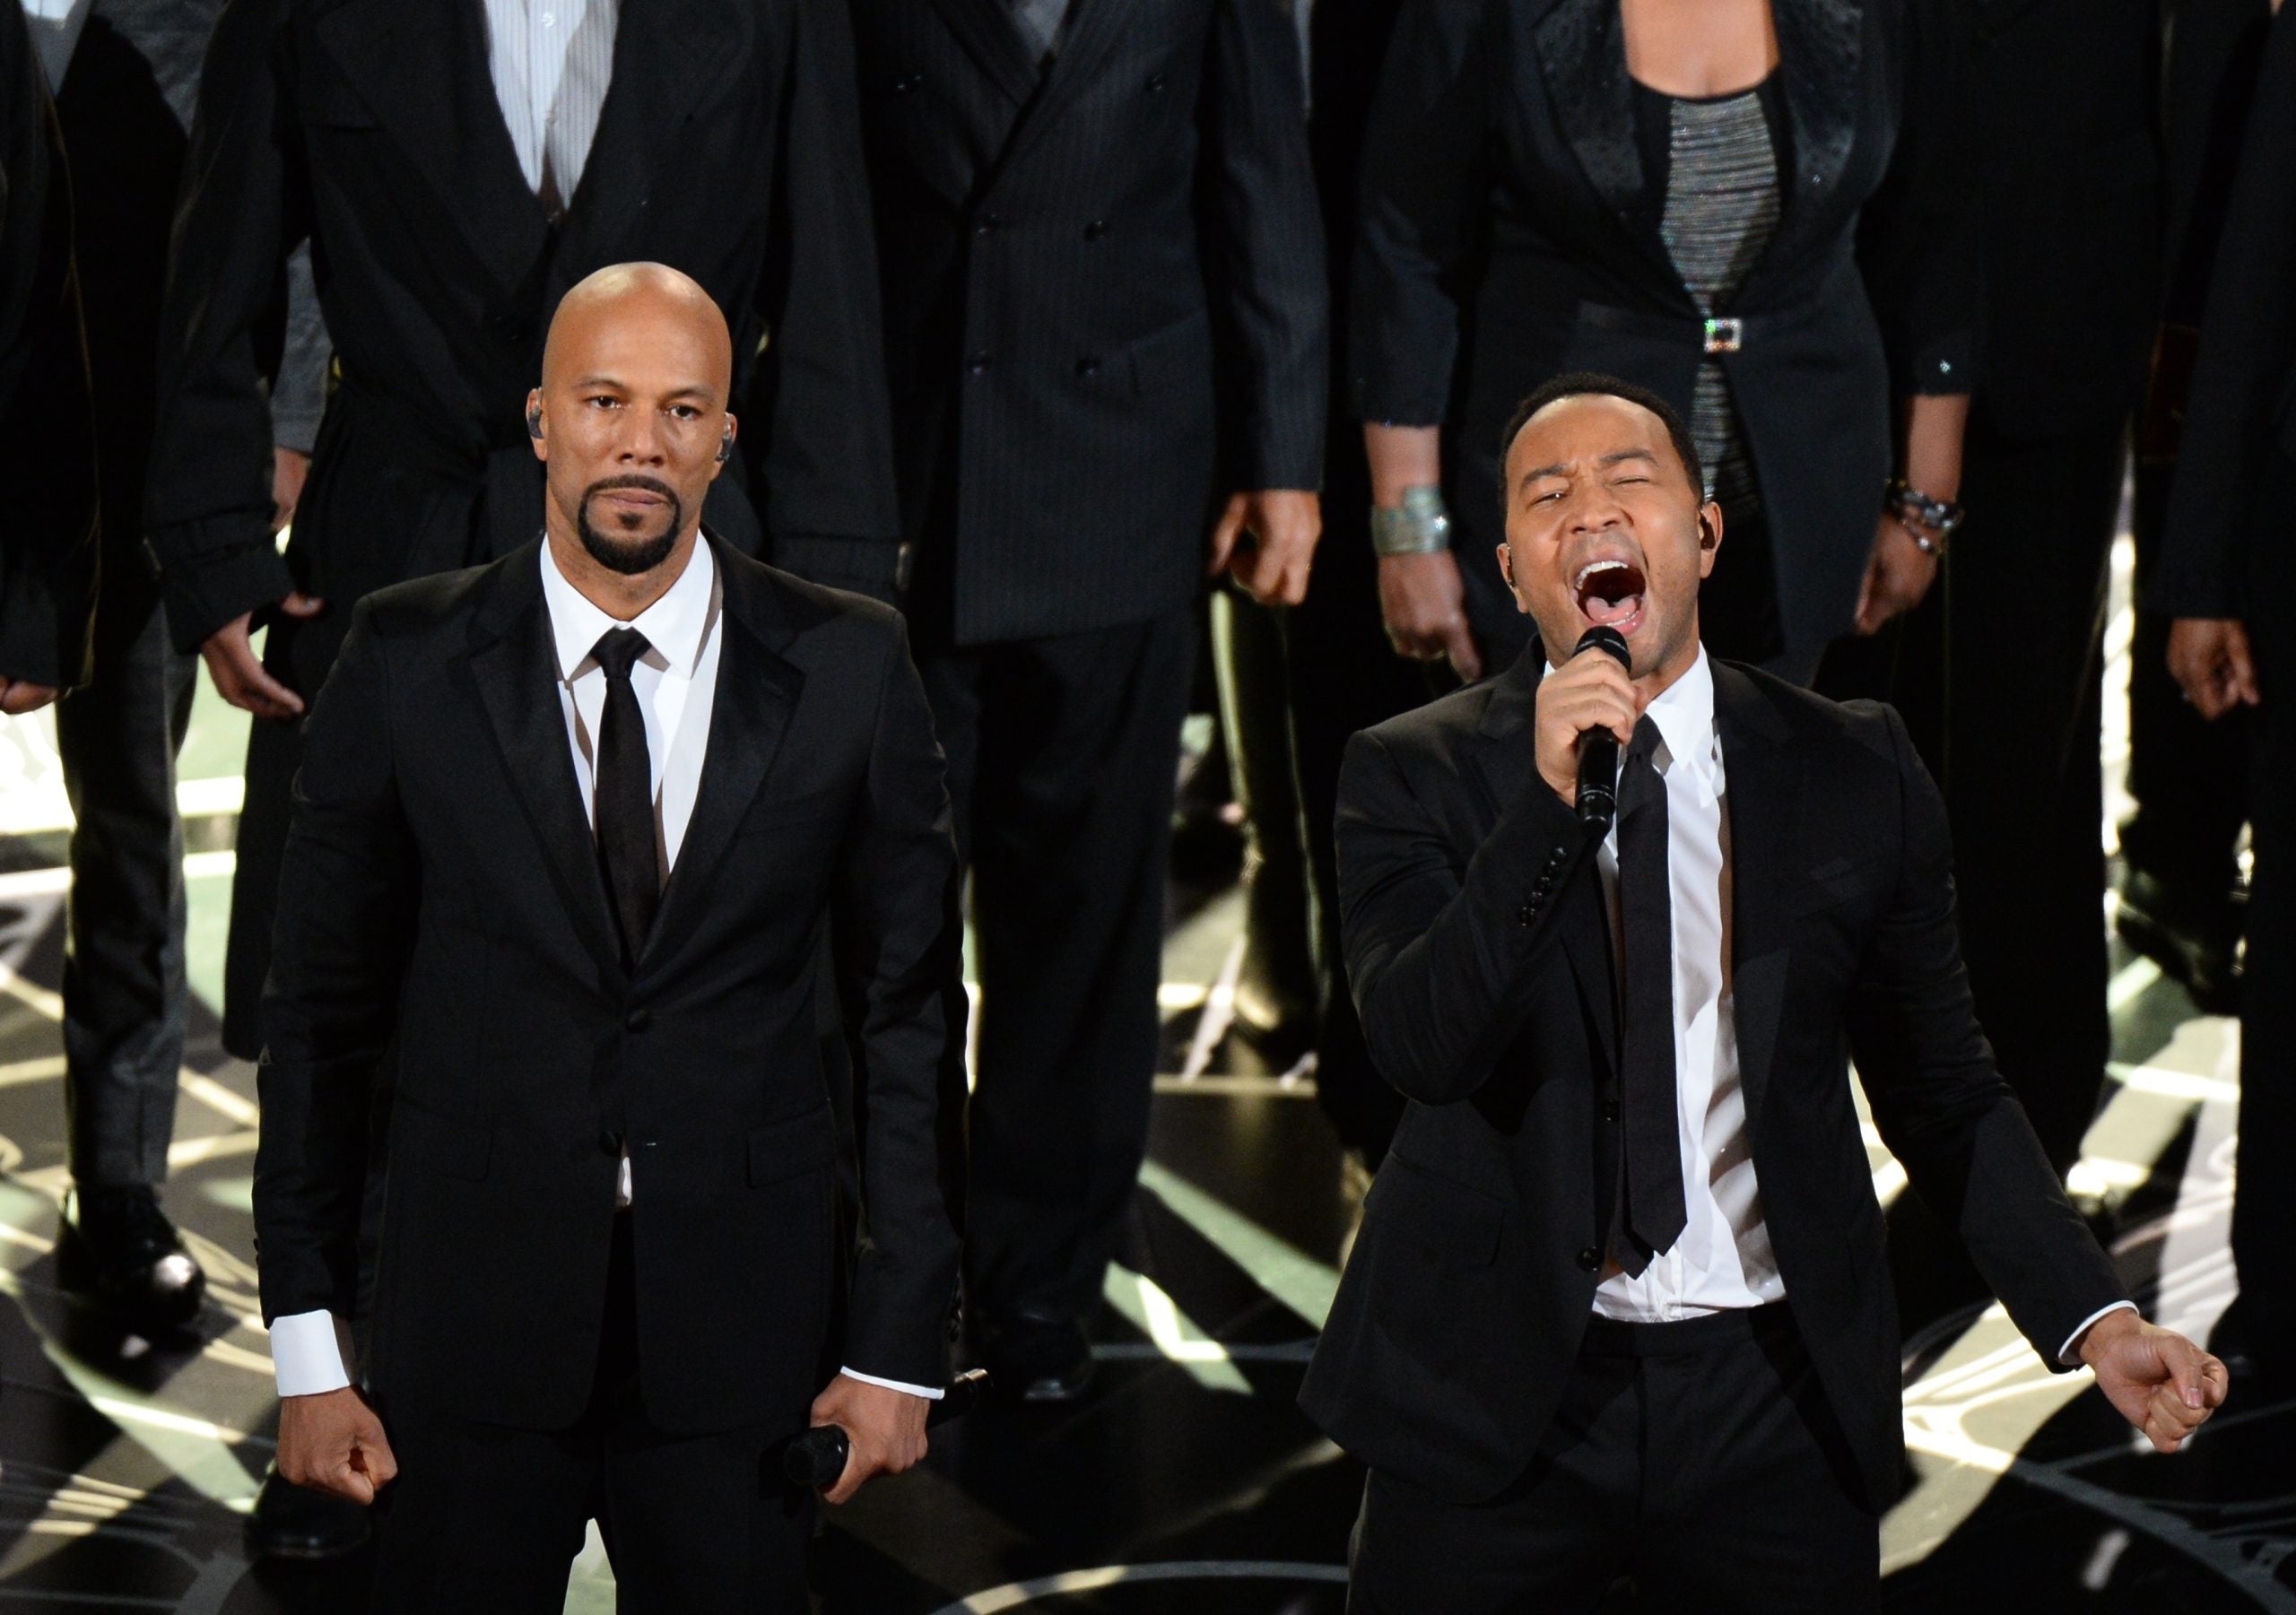 The 10 Most Memorable Academy Awards 'Best Original Song' Performances